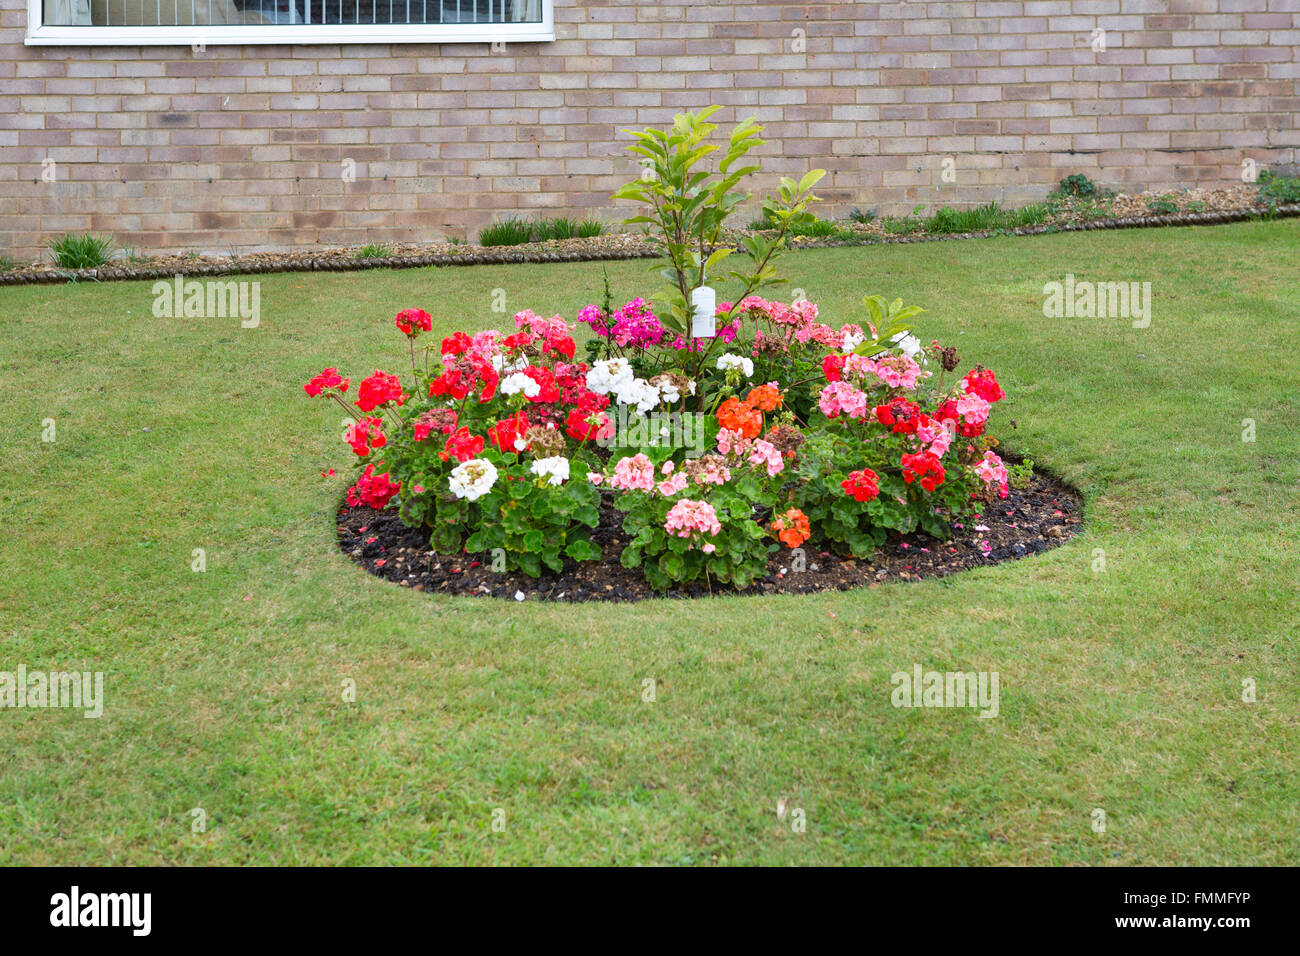 a small circular flower bed in the front garden of a house in the uk